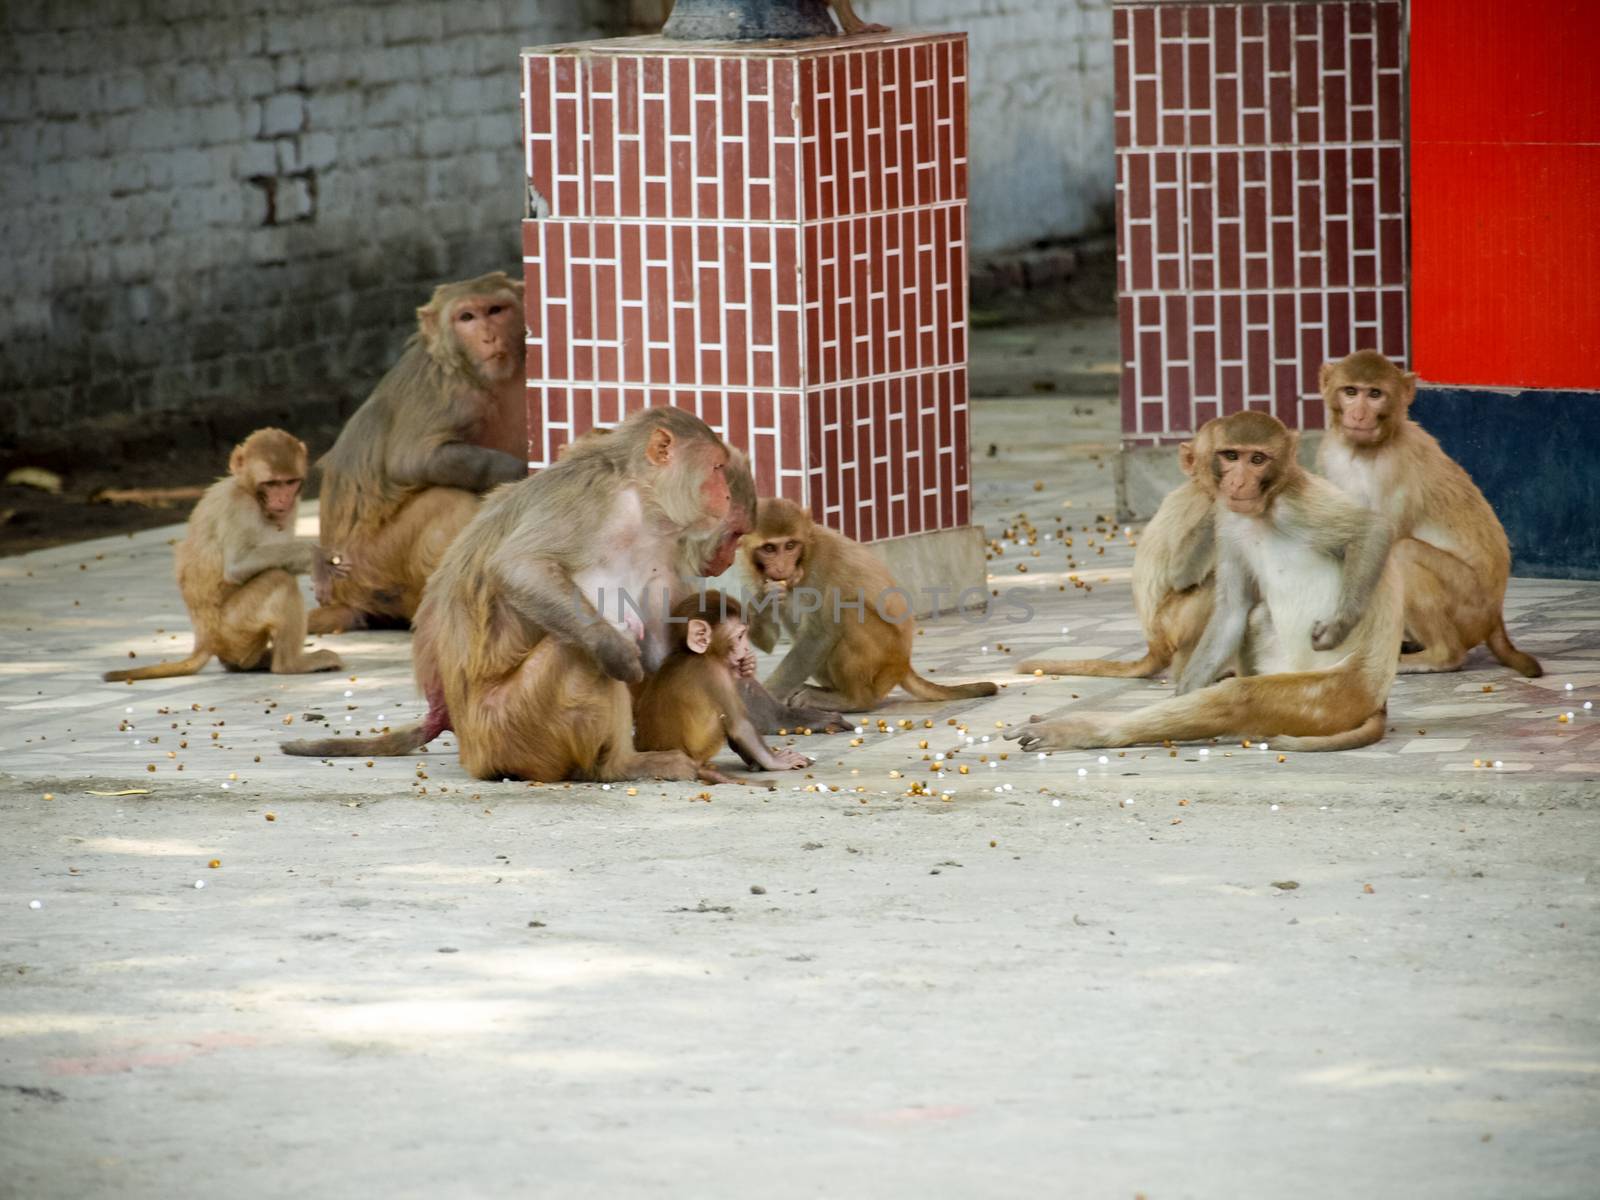 India: Baby monkey with it family in the sacred monkey temple.